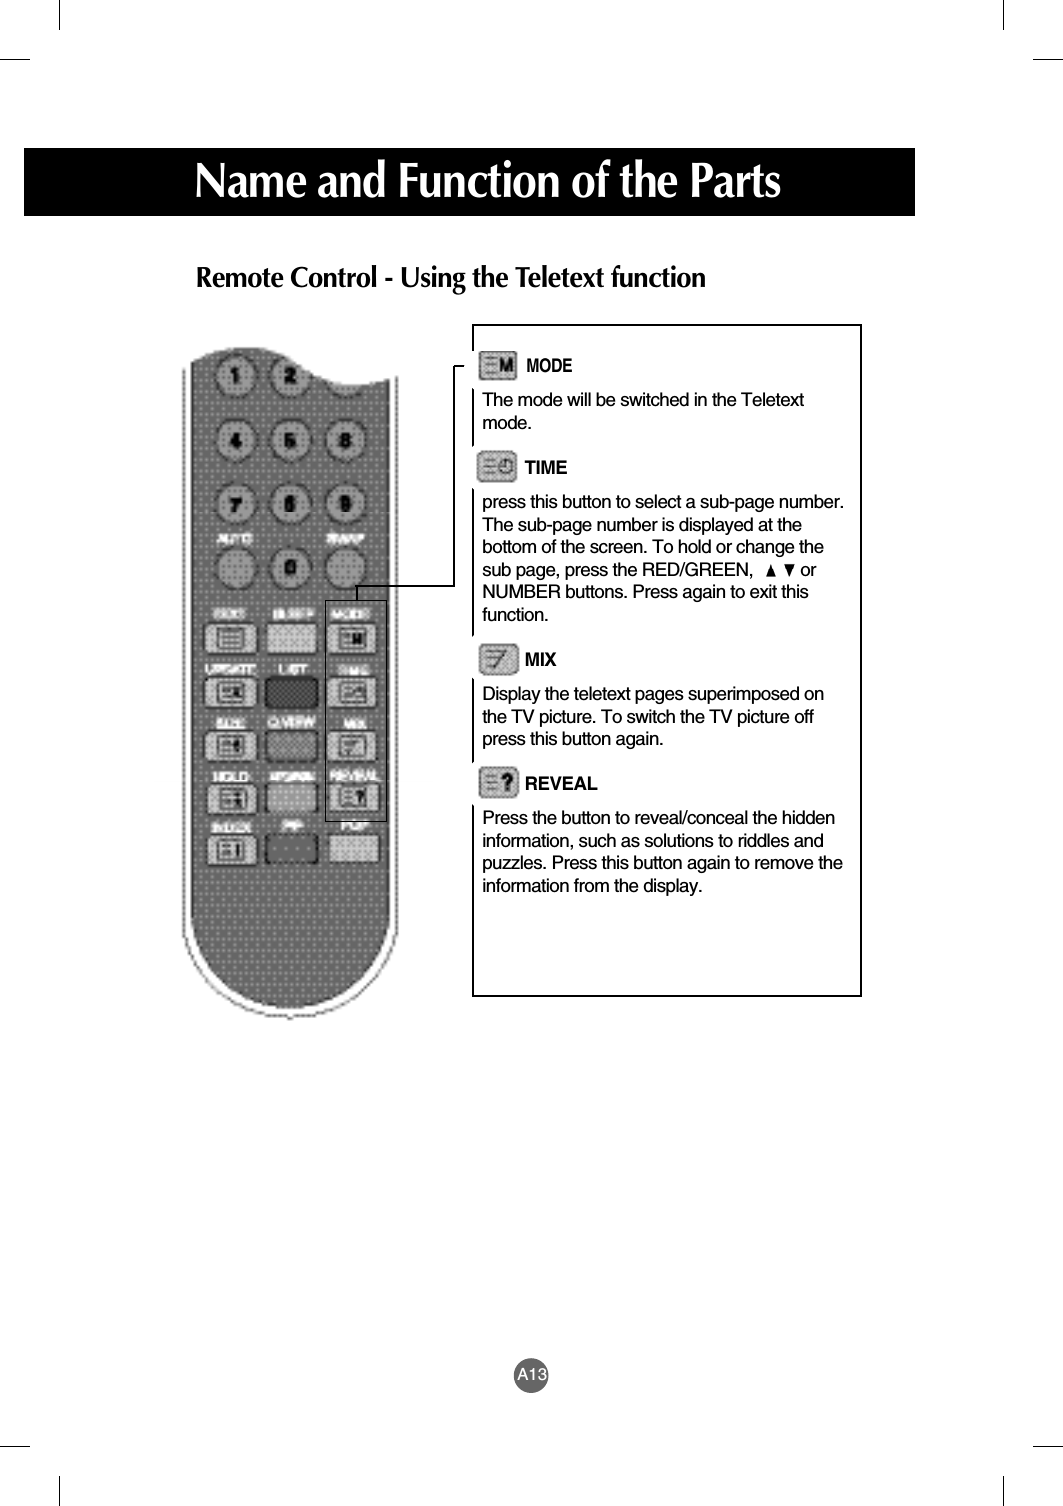 A13Remote Control - Using the Teletext functionName and Function of the PartsMODE The mode will be switched in the Teletextmode.TIMEpress this button to select a sub-page number. The sub-page number is displayed at the bottom of the screen. To hold or change the sub page, press the RED/GREEN,          or NUMBER buttons. Press again to exit this function. MIXDisplay the teletext pages superimposed onthe TV picture. To switch the TV picture offpress this button again.REVEALPress the button to reveal/conceal the hiddeninformation, such as solutions to riddles andpuzzles. Press this button again to remove theinformation from the display.